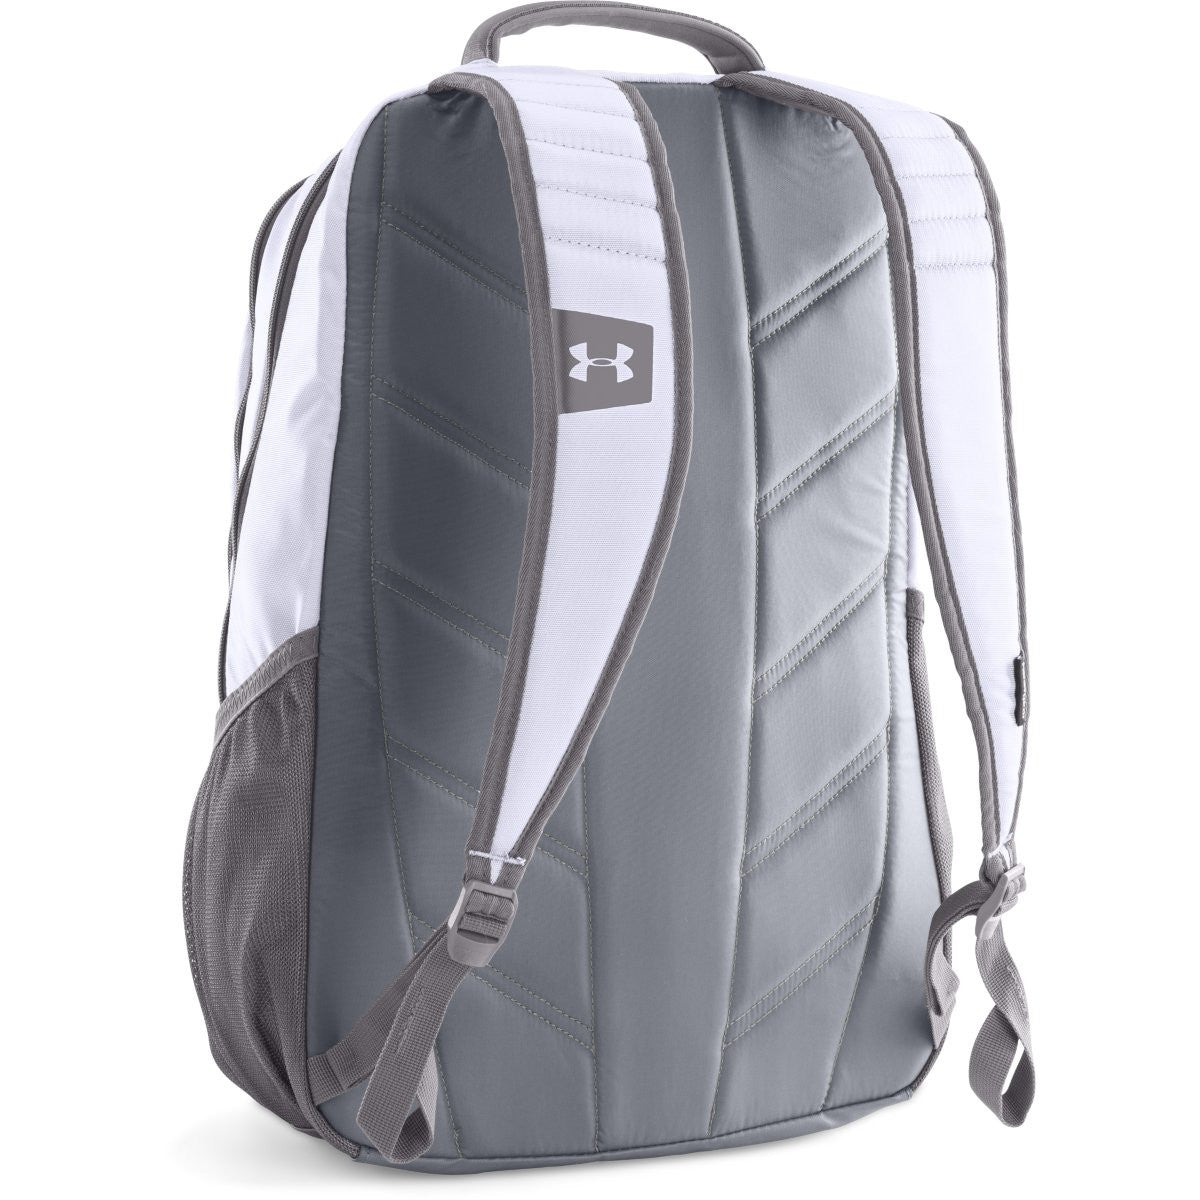 Under Armour Storm Hustle II Backpack, White/Graphite, One Size -  All4Hiking.com